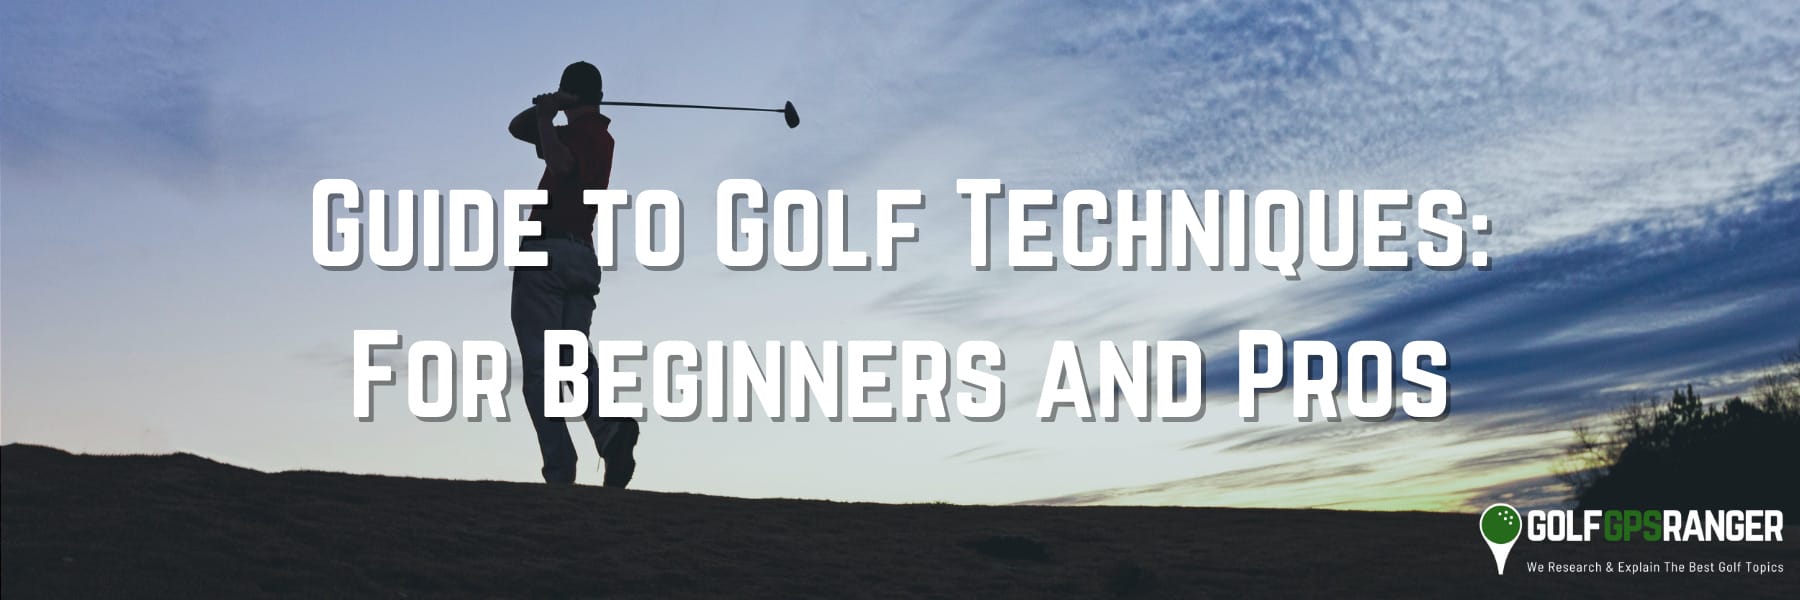 Guide to Golf Techniques: For Beginners and Pros